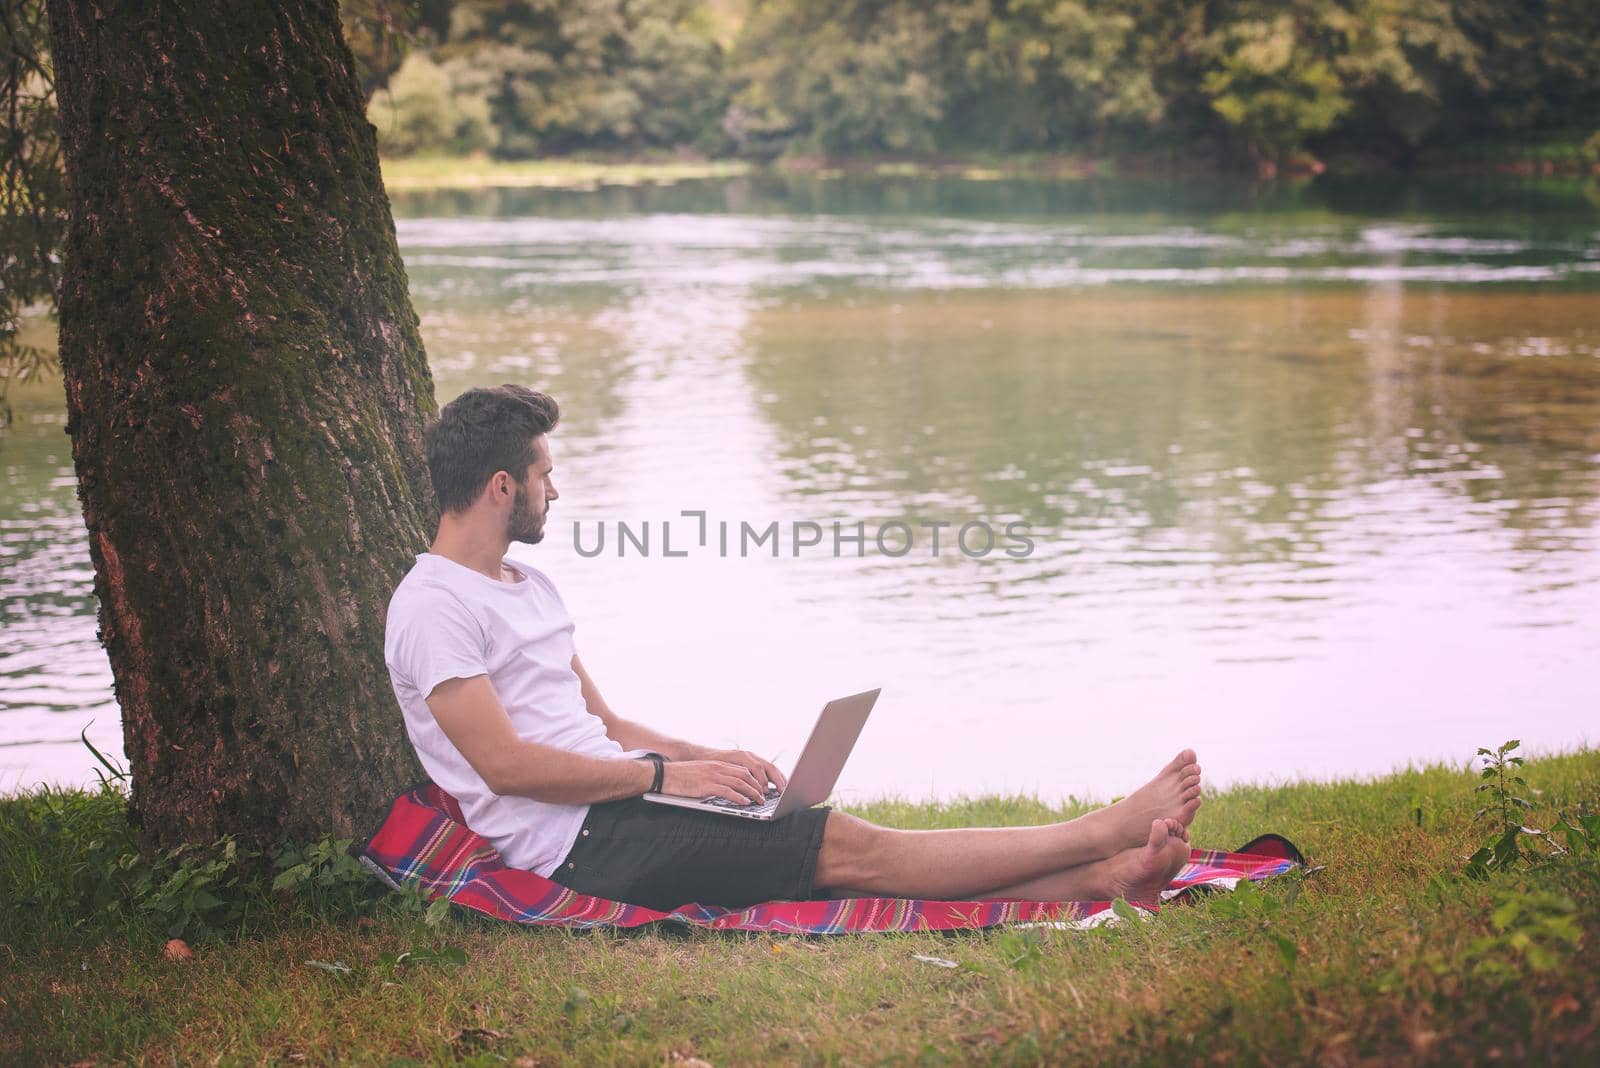 A young freelancer using a laptop computer while working in beautiful nature under the tree on the bank of the river